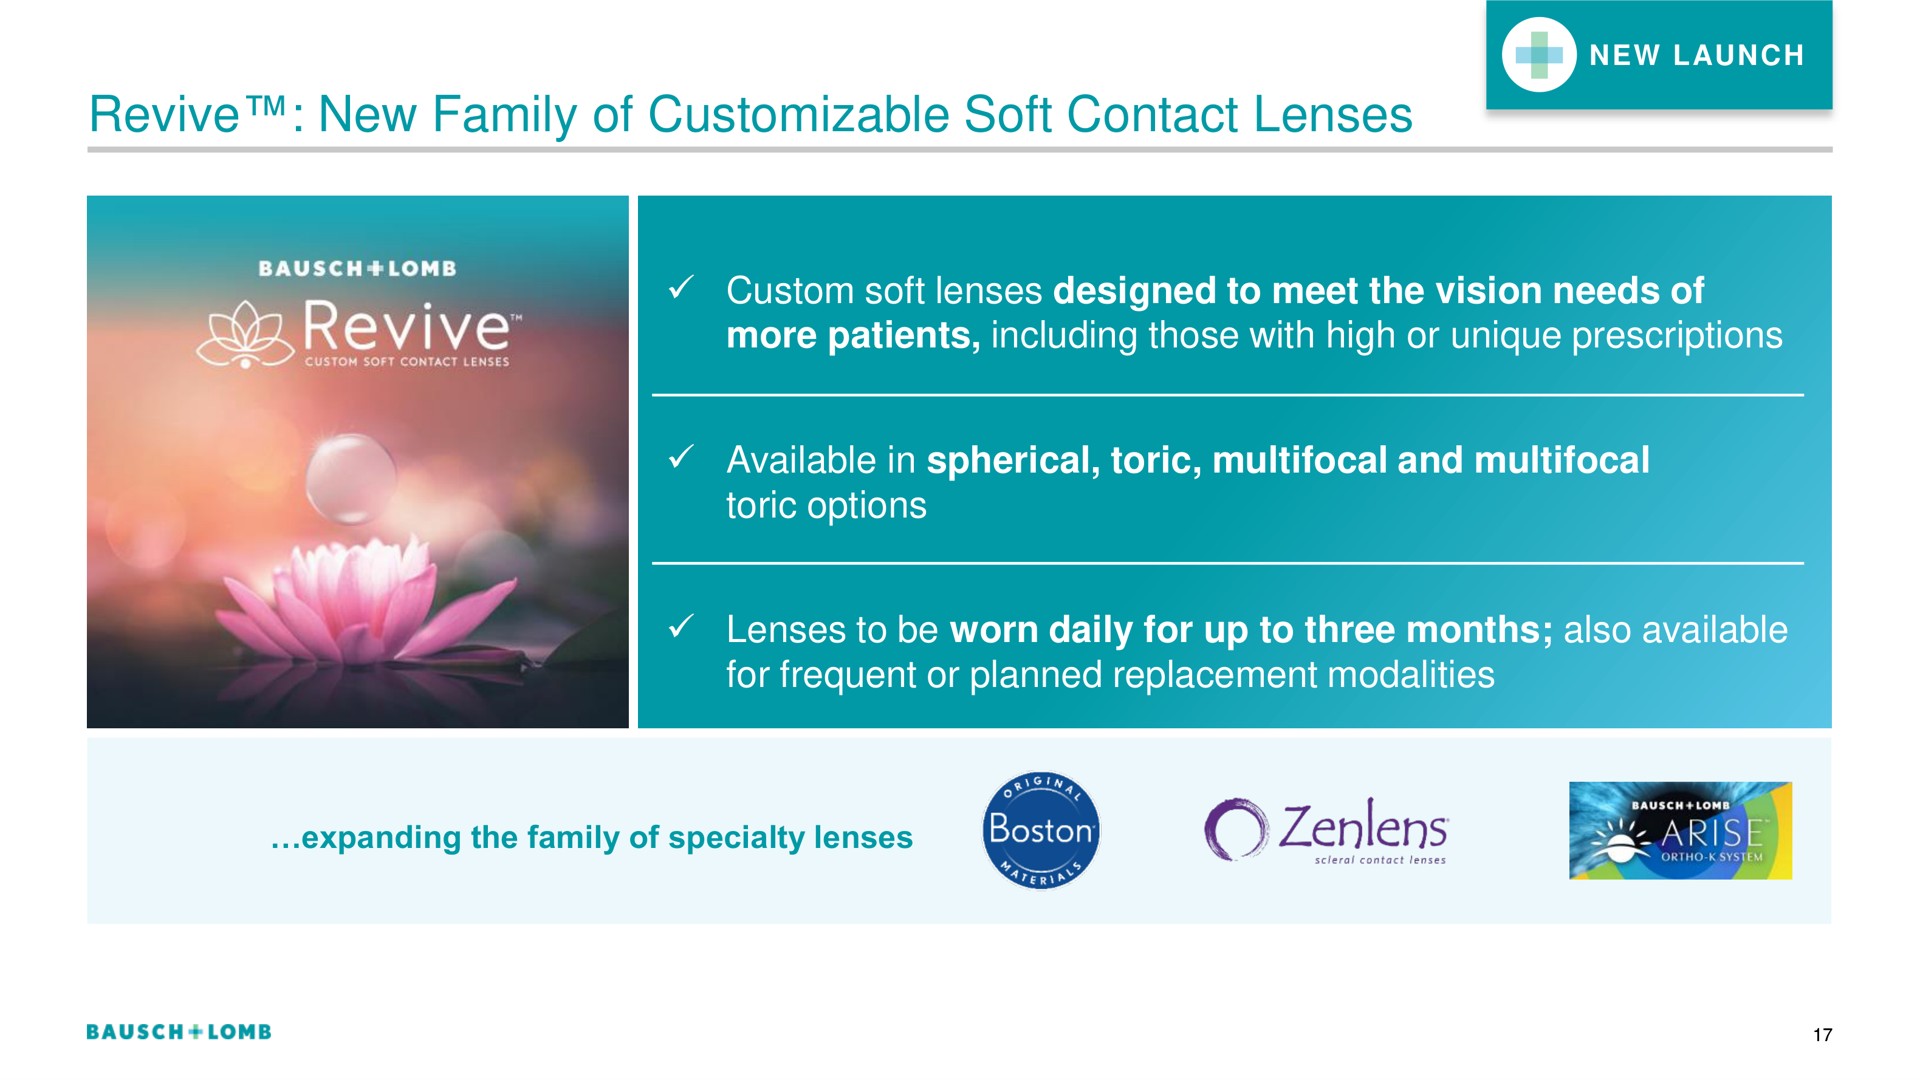 revive new family of soft contact lenses a custom designed to meet the vision needs | Bausch+Lomb